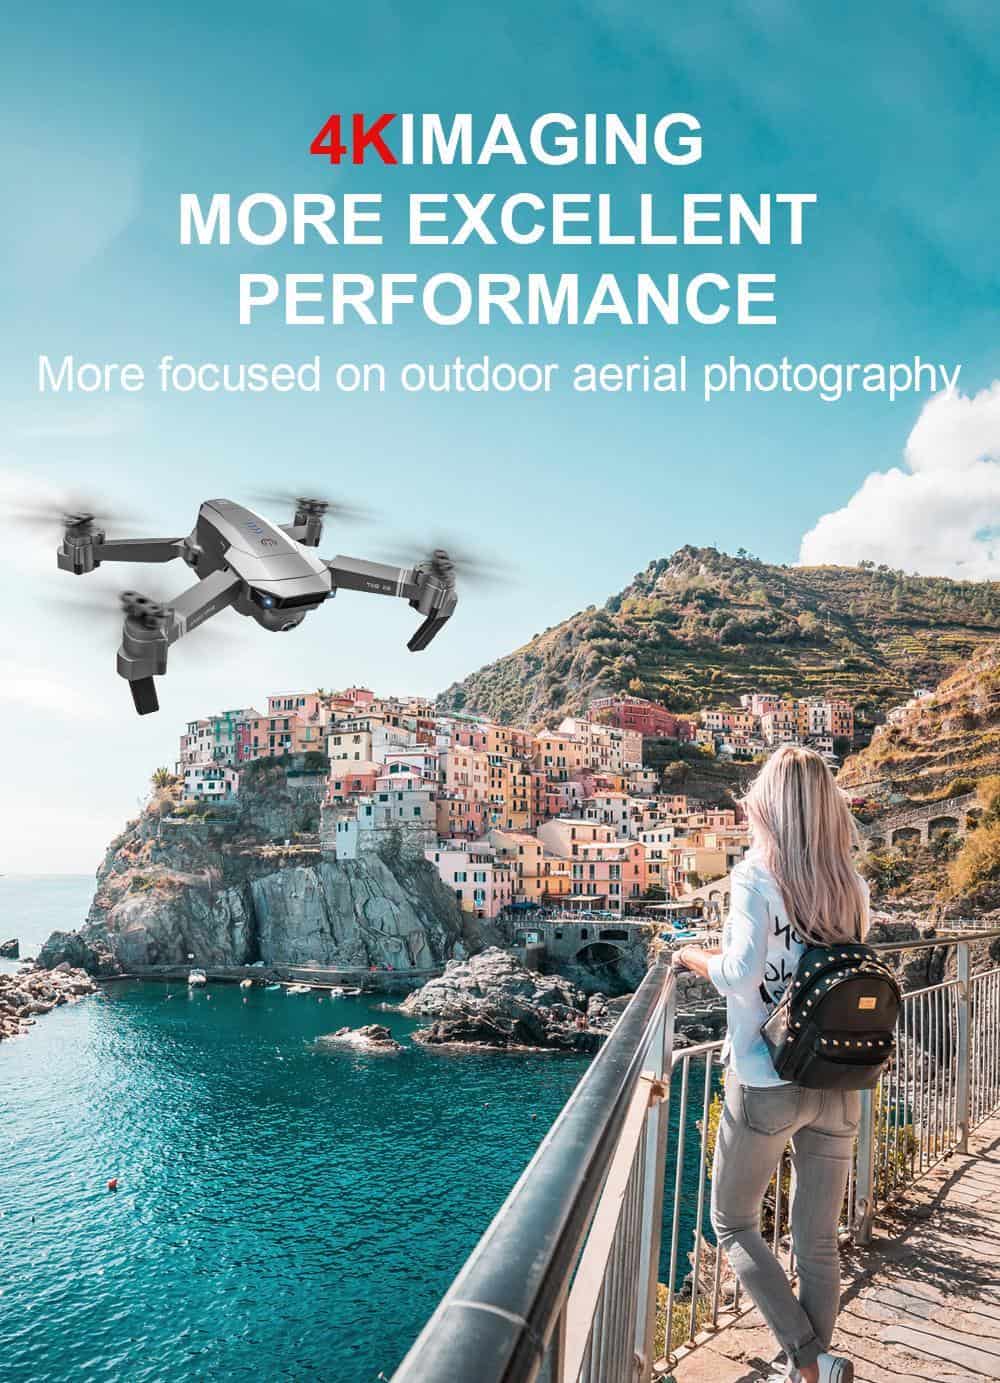 SG907 Drone 4k Camera X50 ZOOM Wide Anti-shake 5G WIFI FPV Gesture photo GPS Professional Dron RC Helicopter Quadcopter Xmas